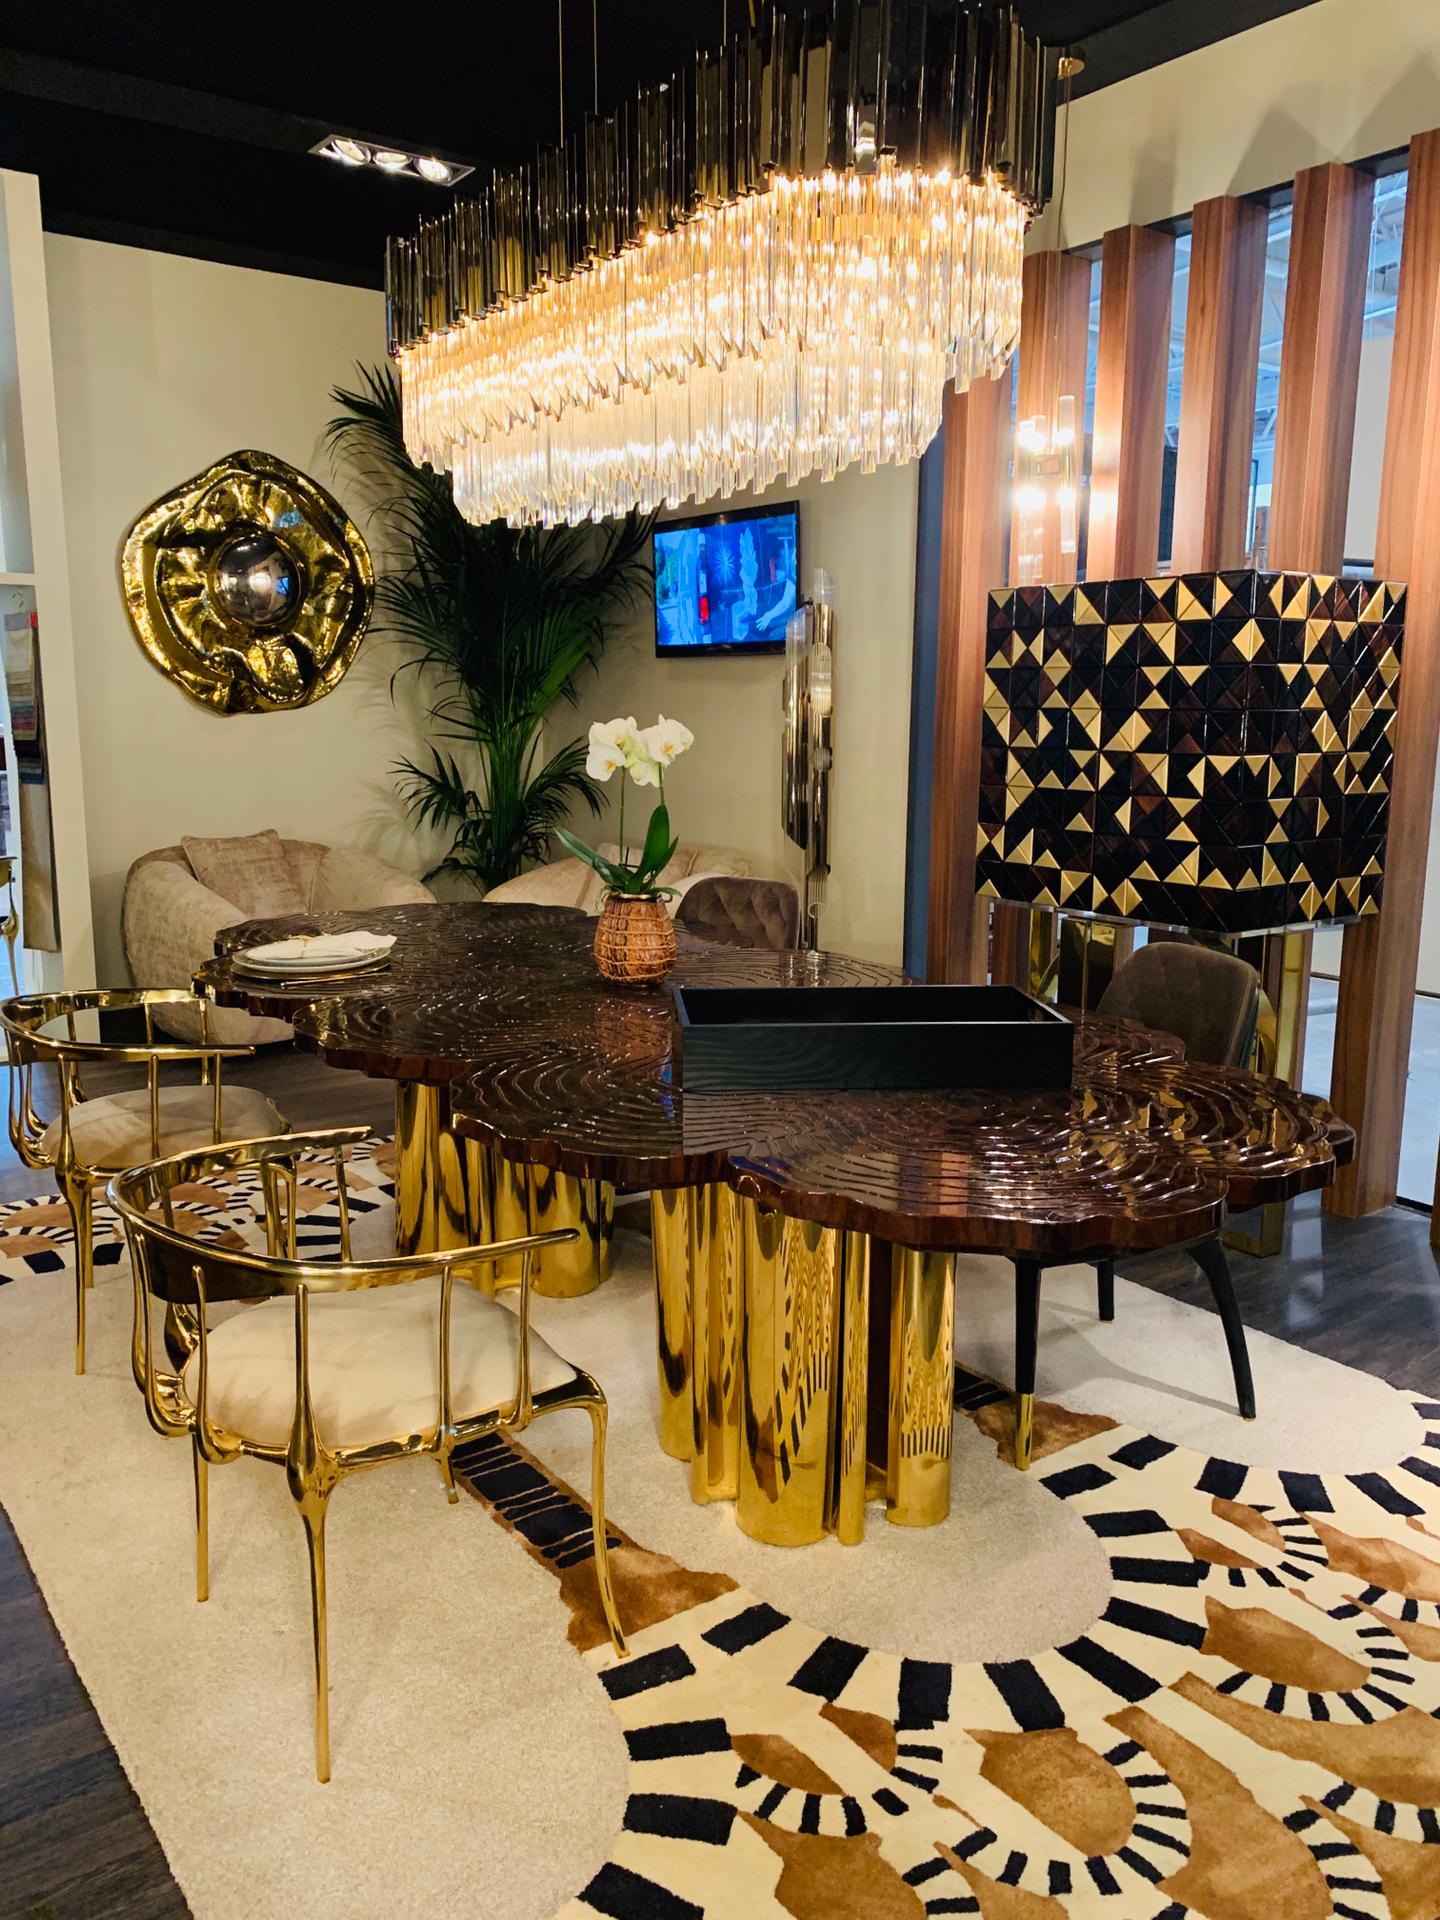 Maison Et Objet 2020- What to Expect